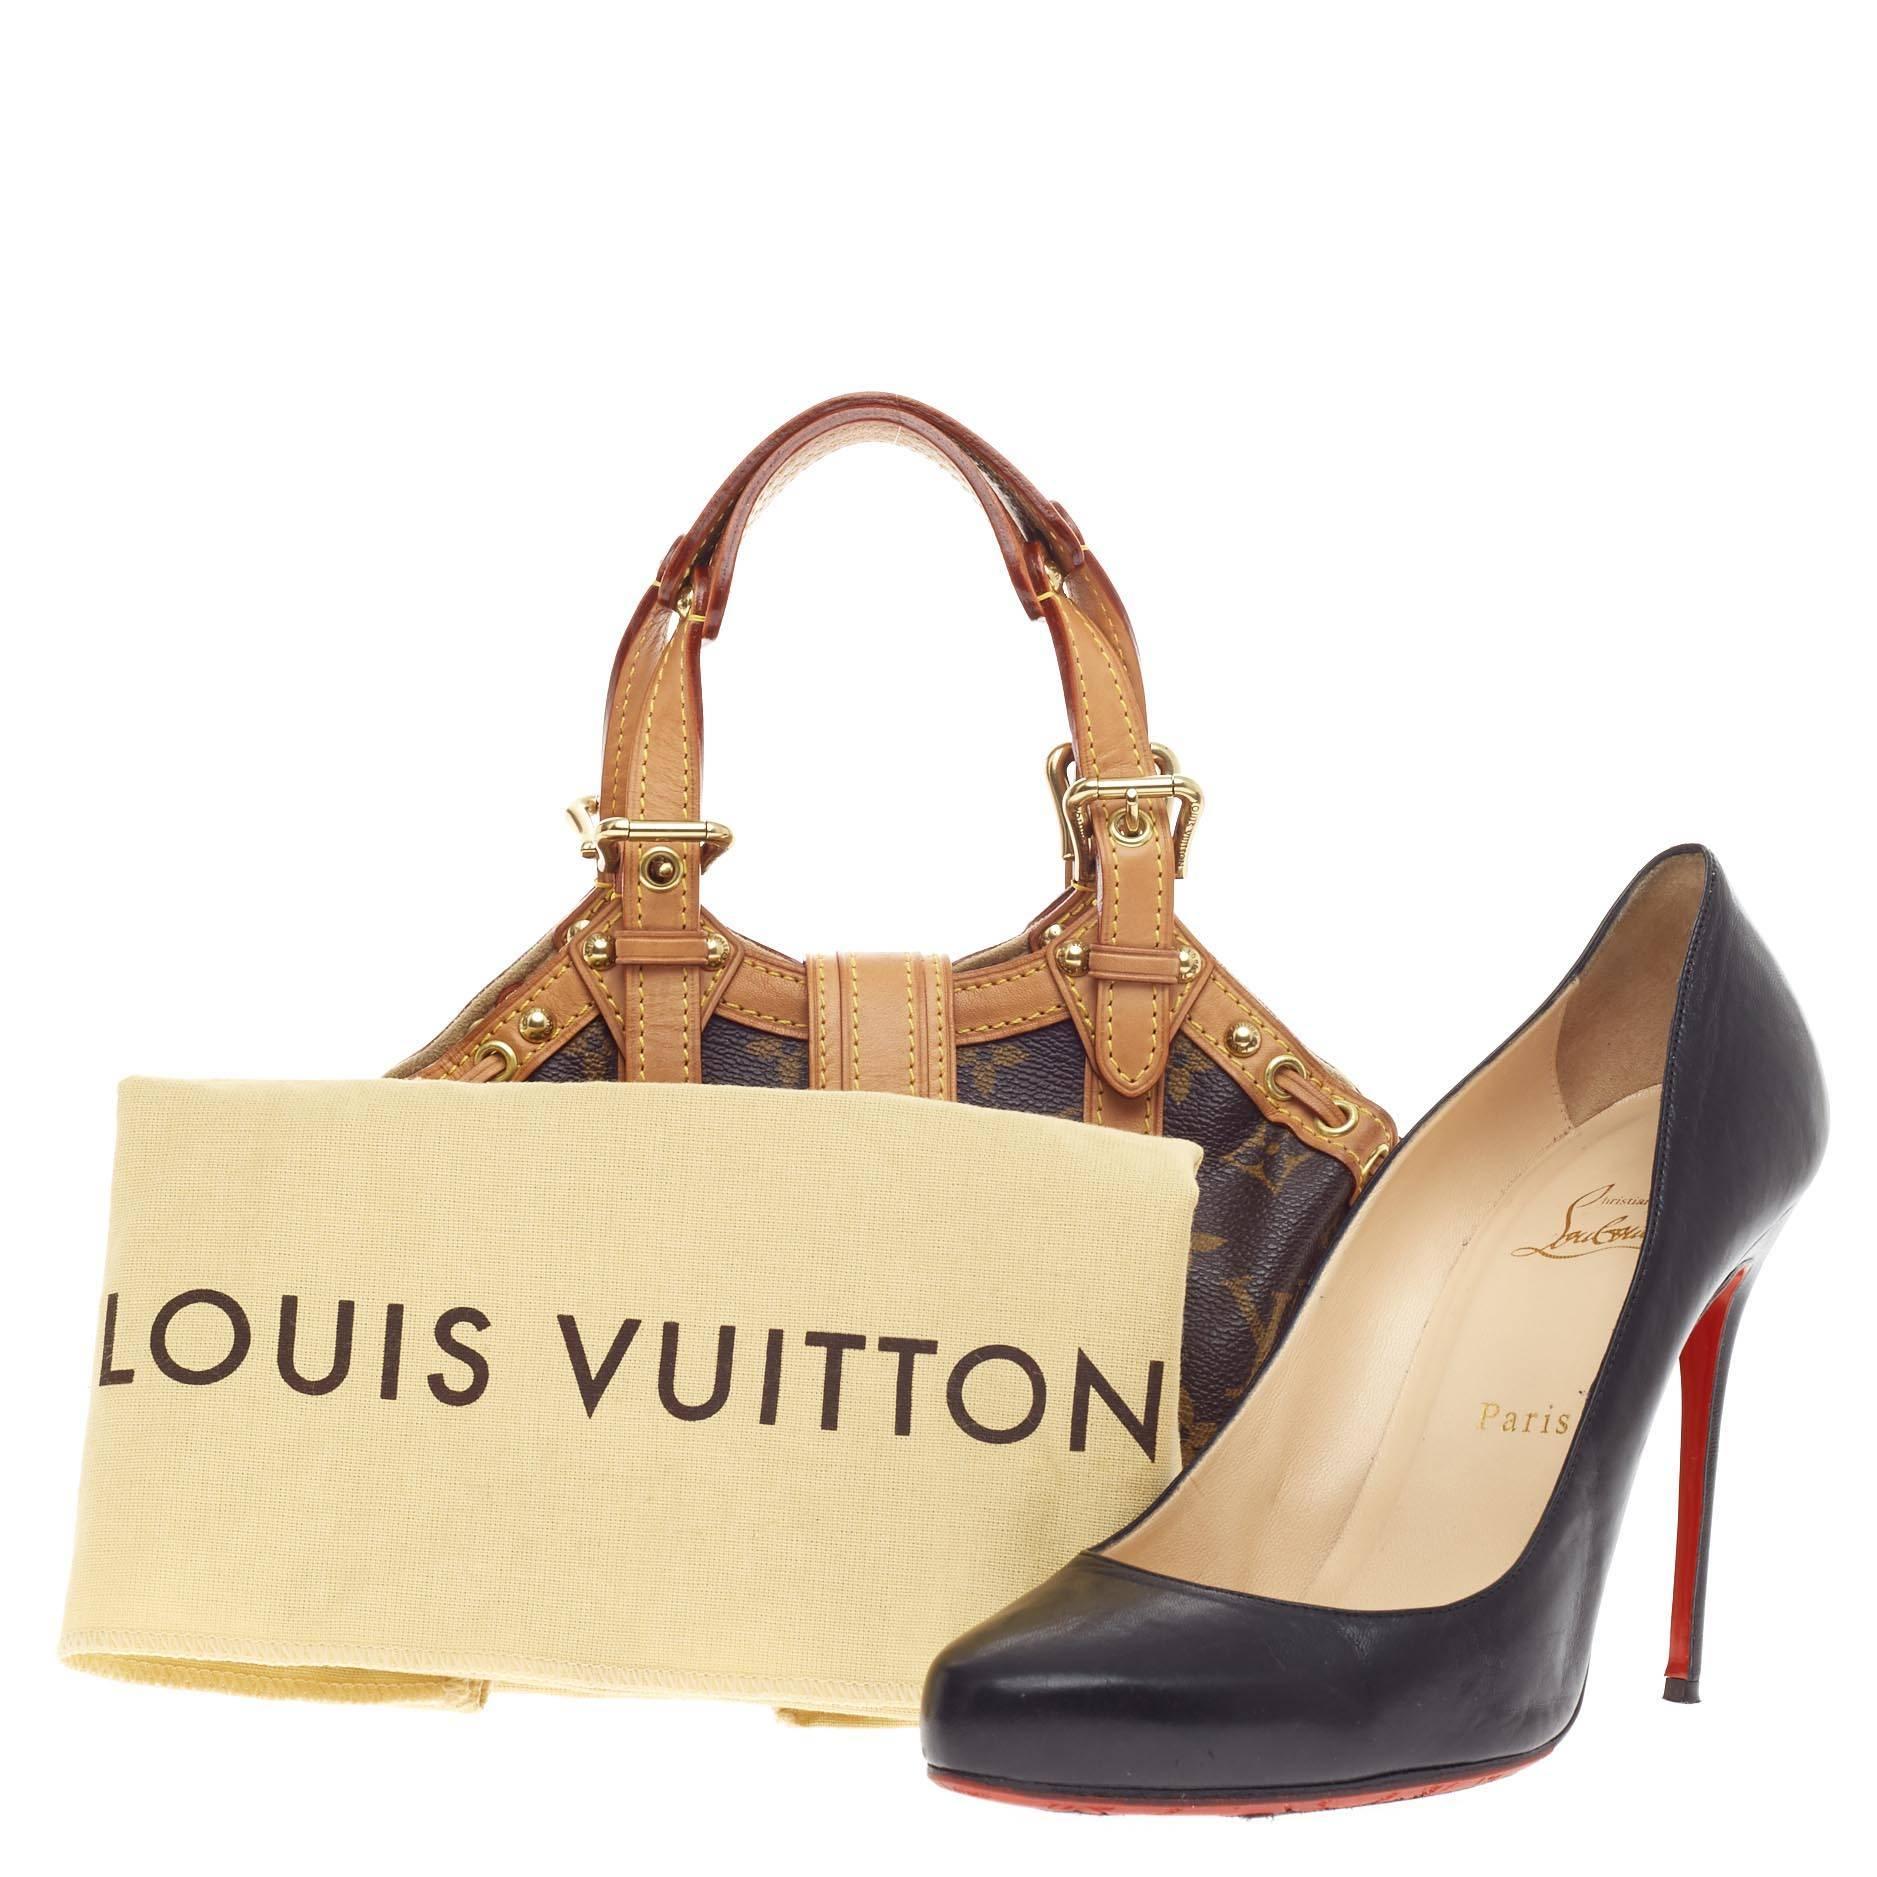 This authentic Louis Vuitton Theda Monogram Canvas PM showcases a balance of feminine style with classic design. Constructed from Louis Vuitton's signature monogram canvas print, this limited edition collection shoulder bag features dual belted